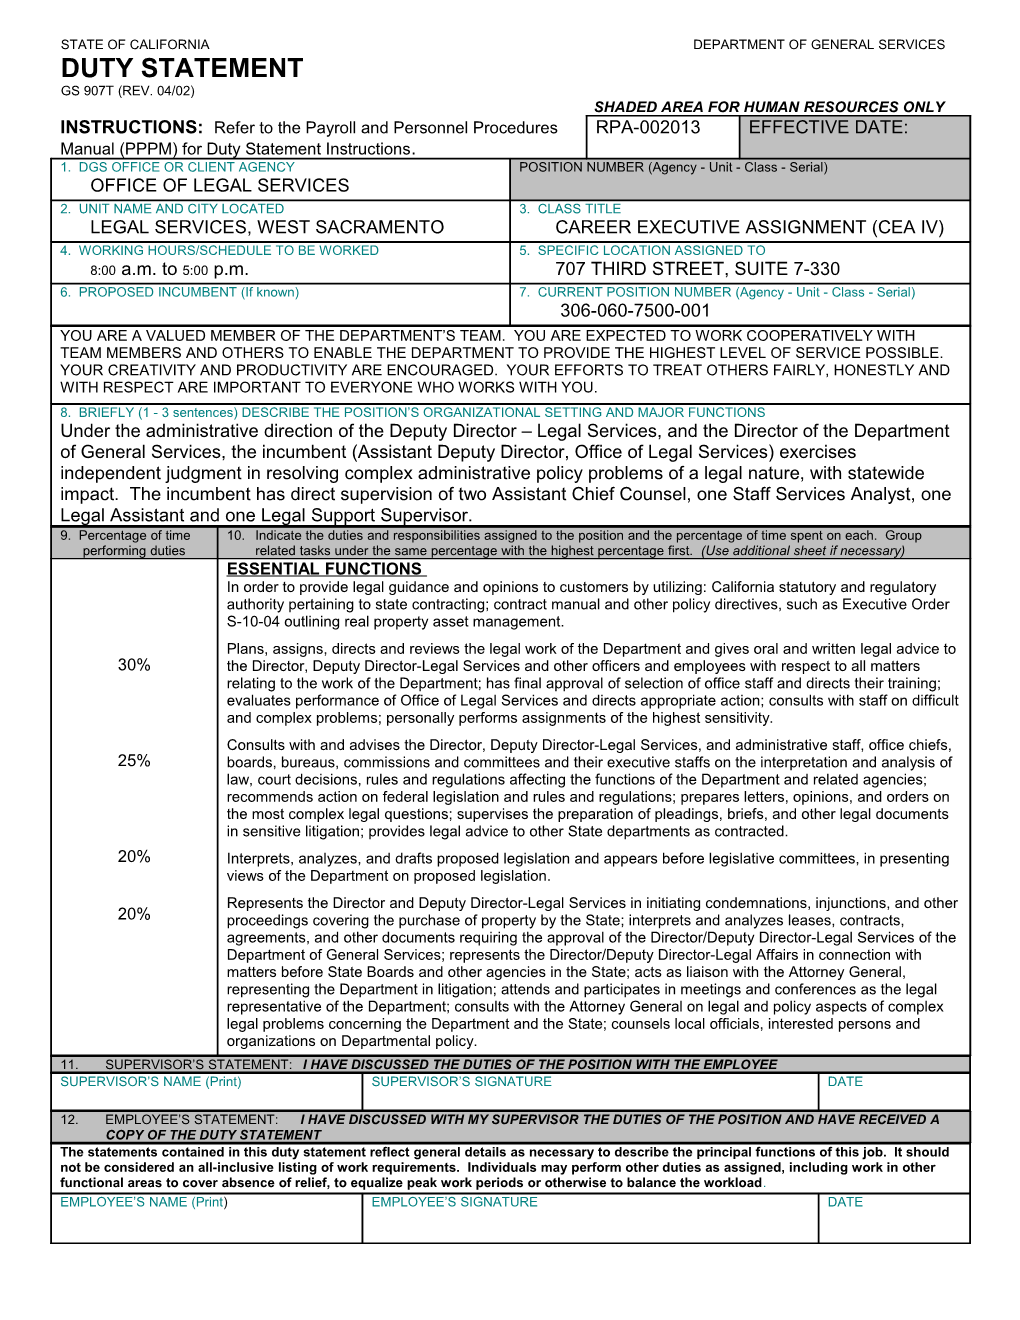 State of California Department of General Services s6